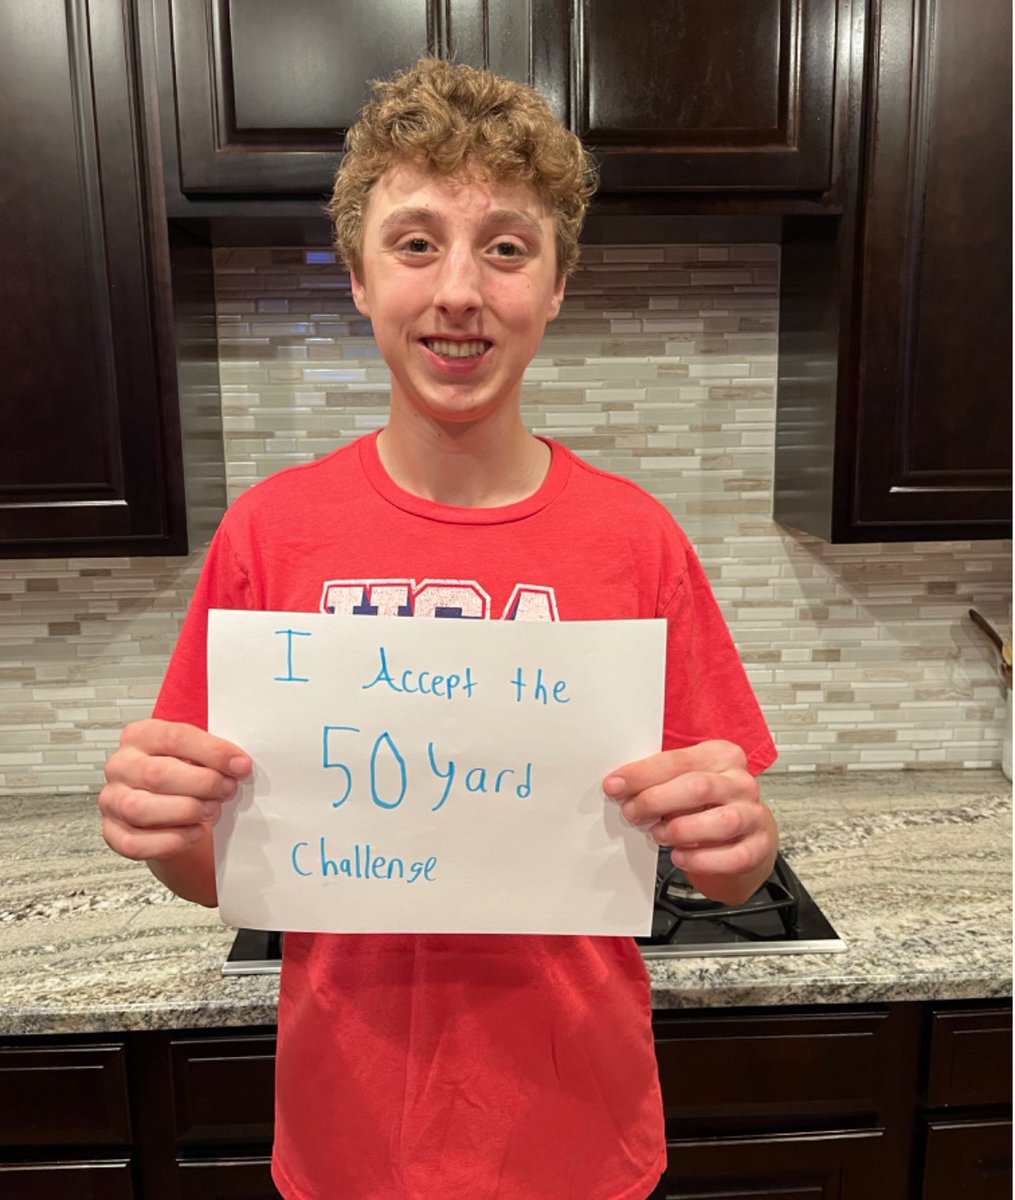 It brings me great joy to share with you the news of a new addition to our family. Please join me in welcoming Ayden of Elgin , IL to our fold! Ayden has stepped up & accepted our 50 yard challenge .By embracing this challenge, he has shown us that he is committed to making a